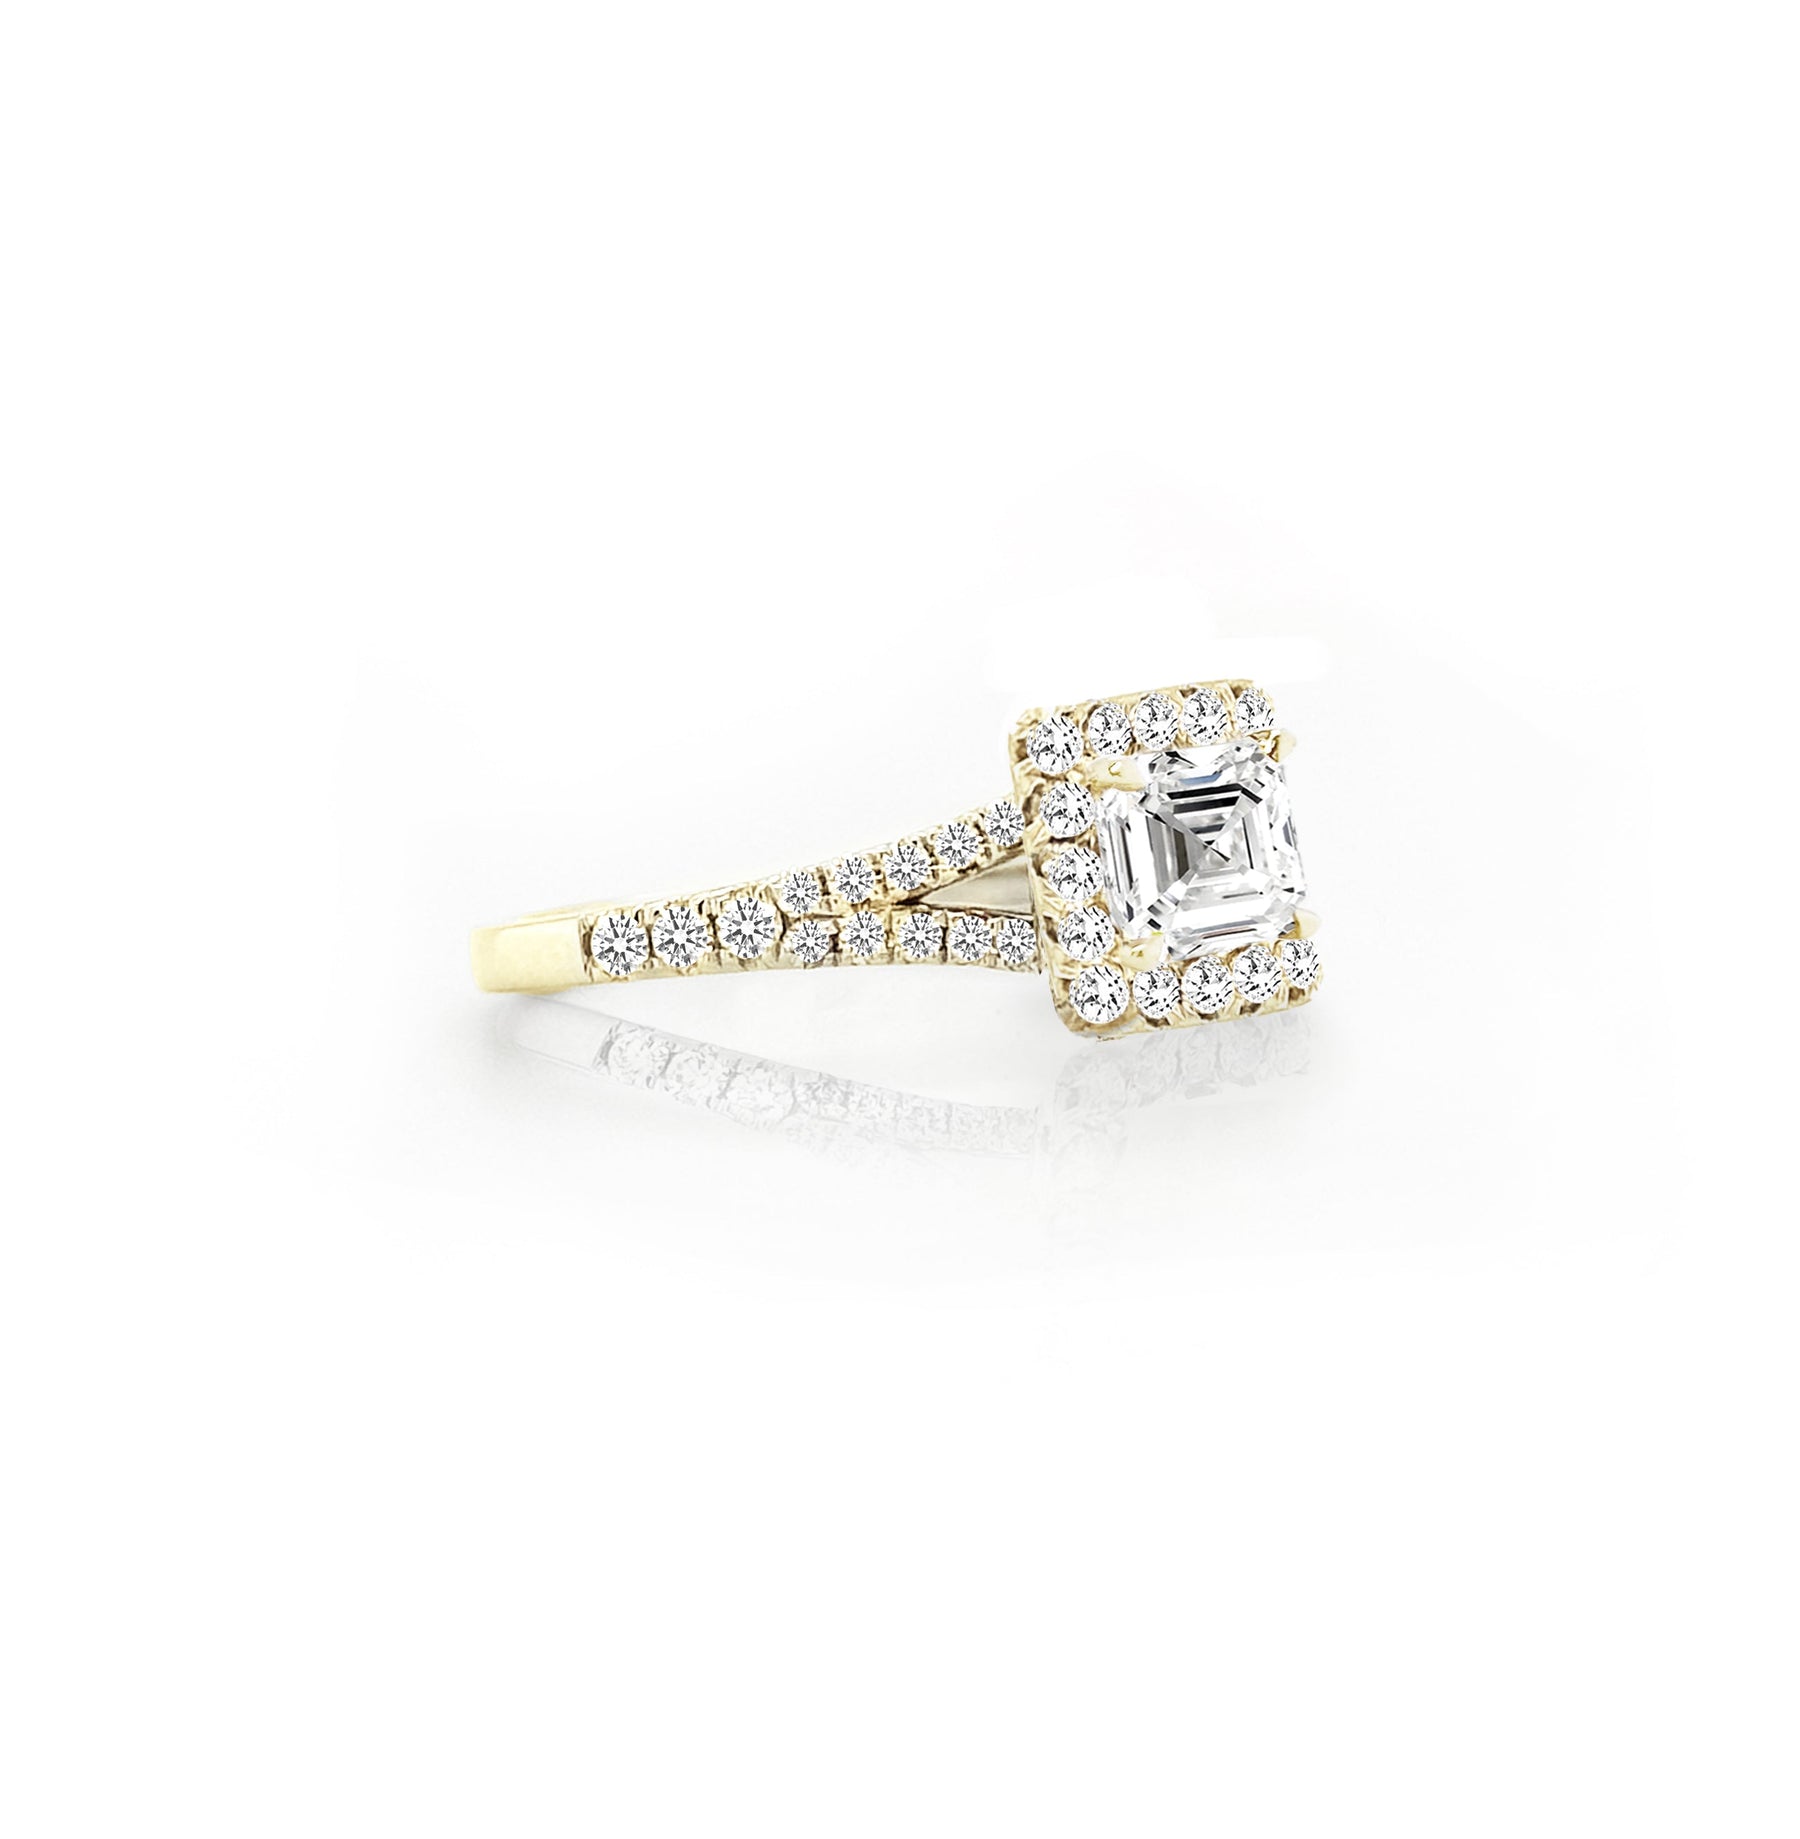 Everly Engagement Ring